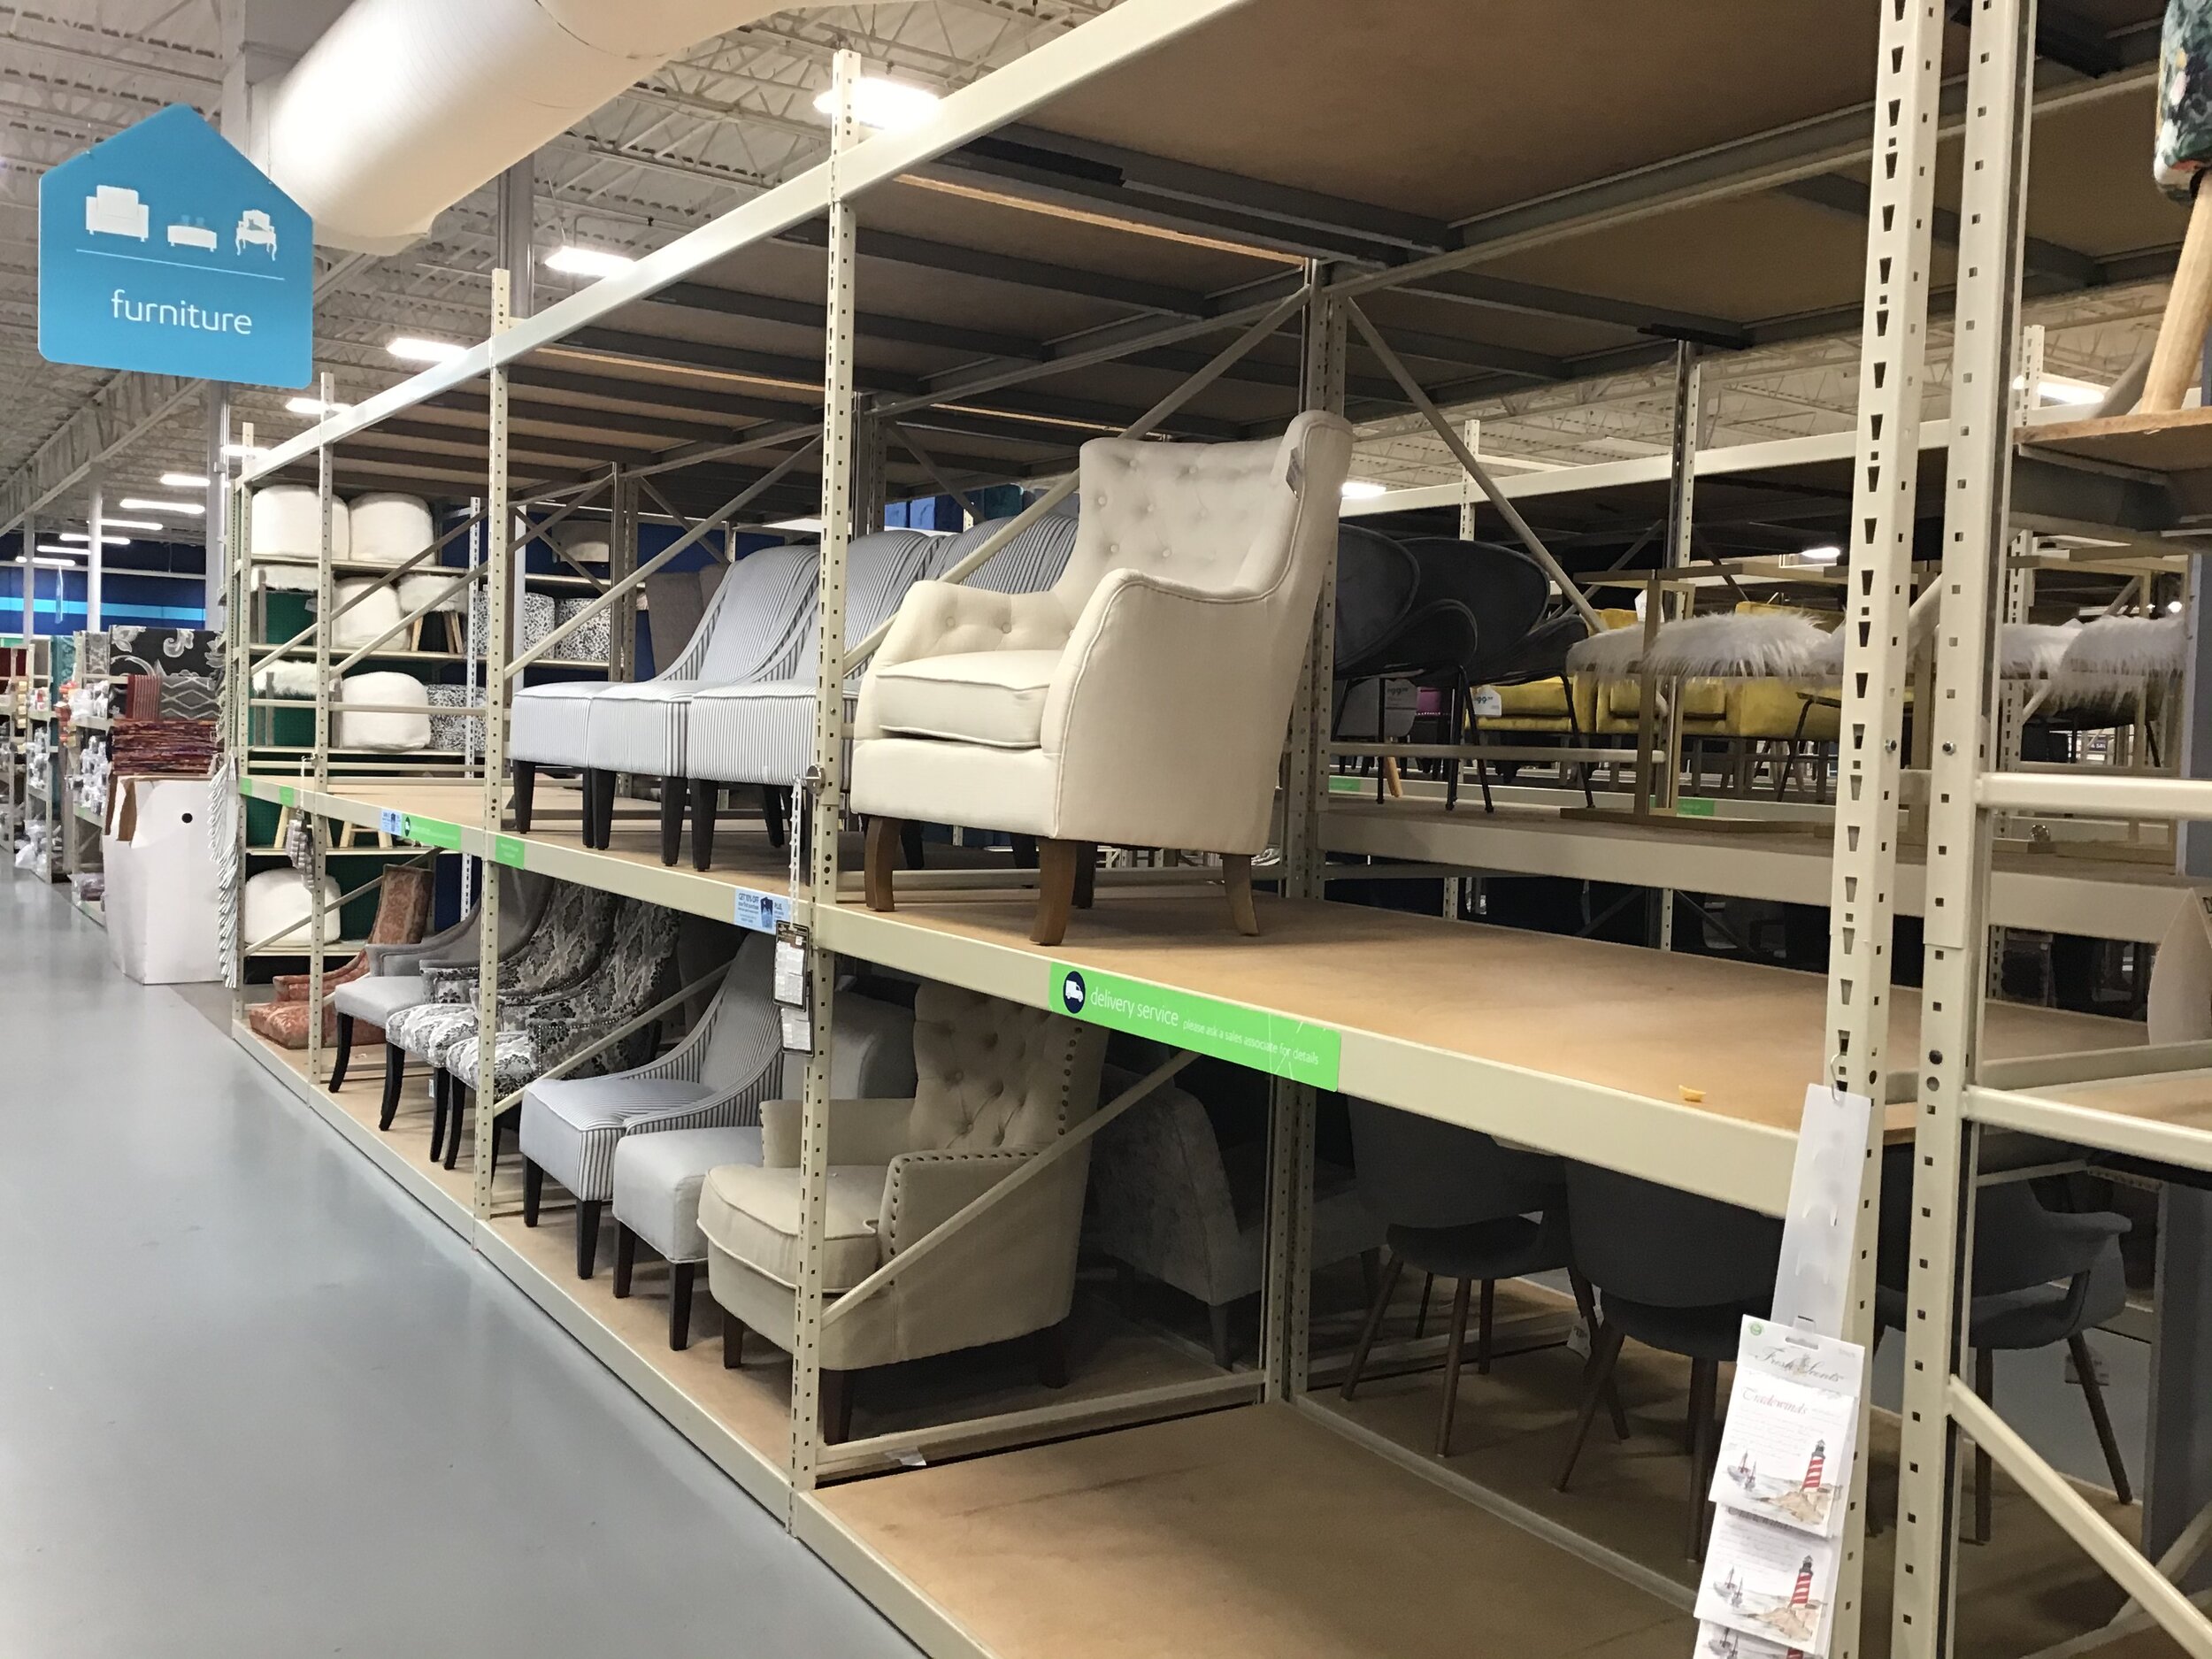 The company said its inventory position is improving, but supply constraints were evident at the Greensboro store, with the empty spaces on the furniture racks and in other departments.